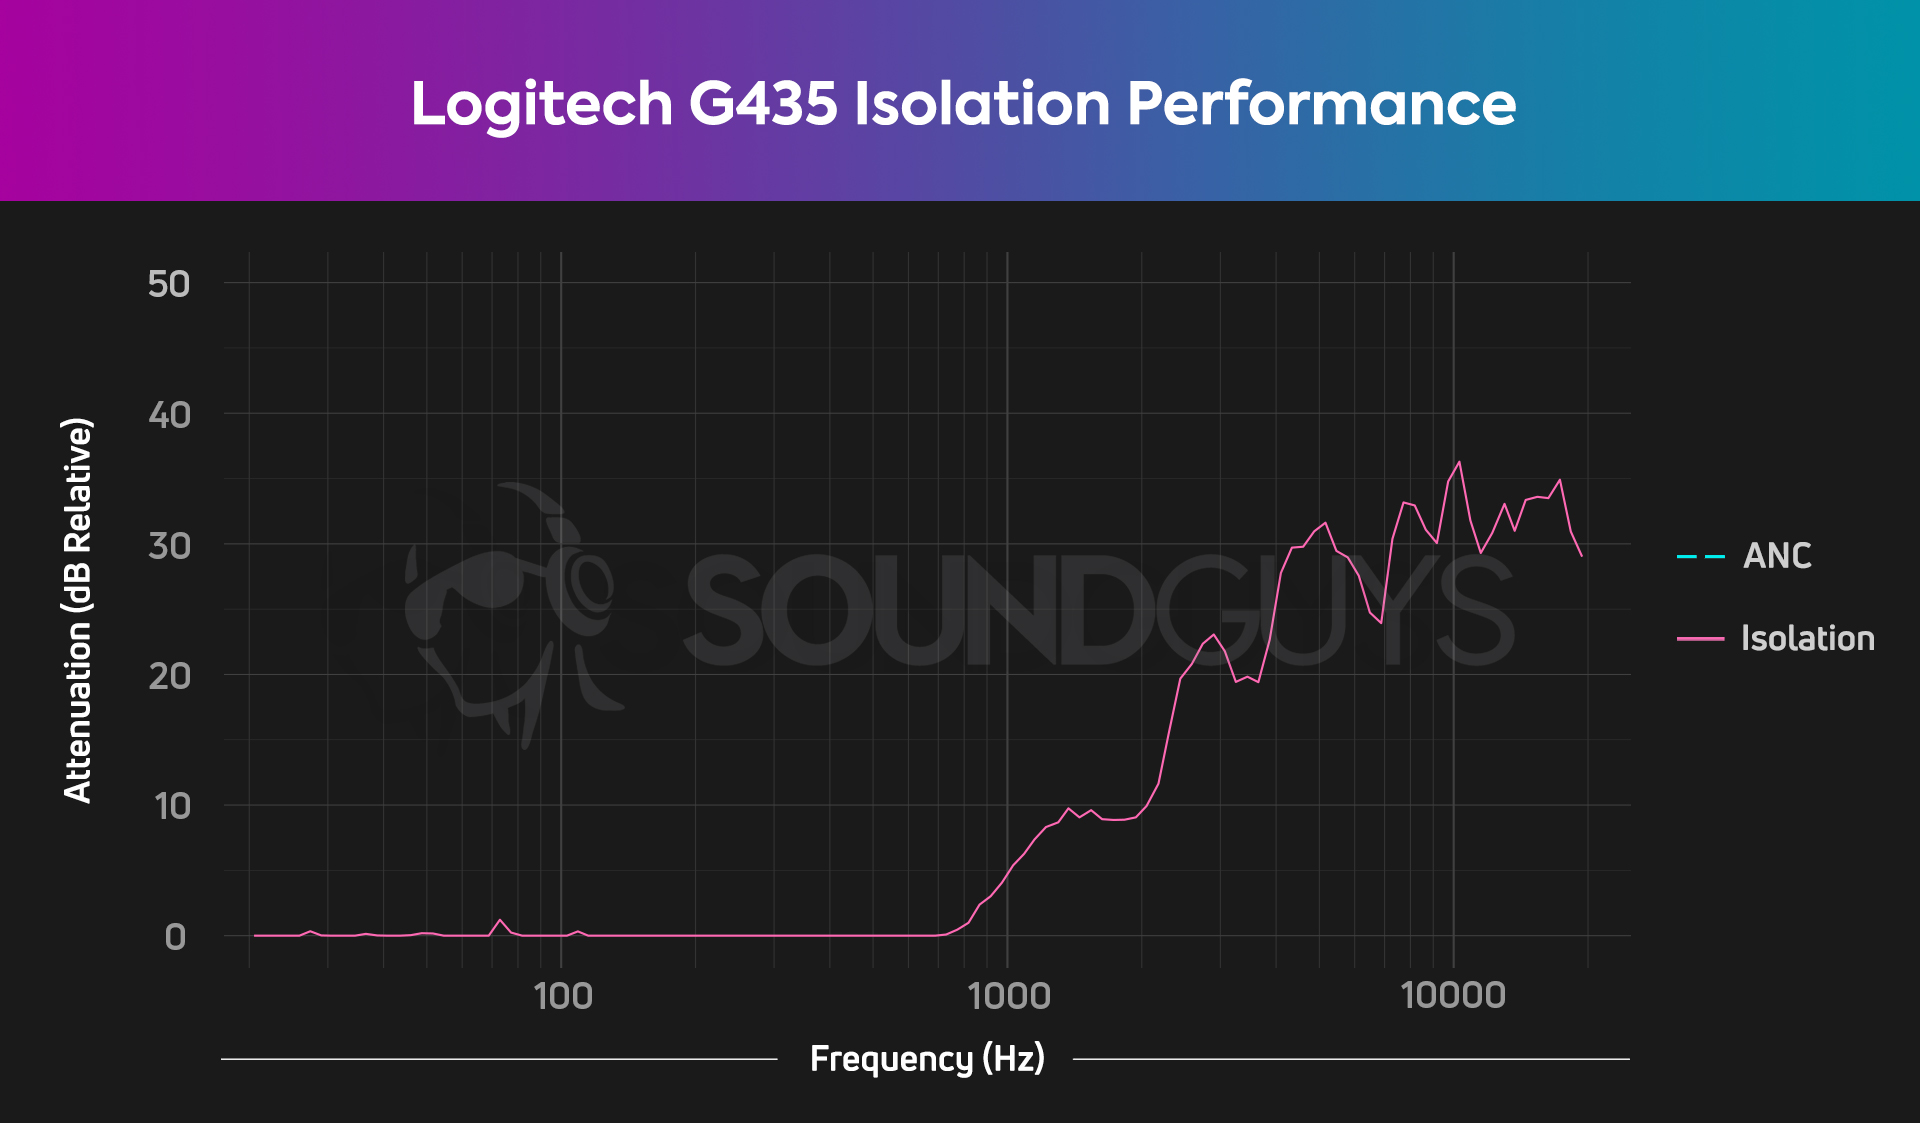 An isolation chart for the Logitech G435 Lightspeed, which shows pretty mediocre isolation performance.